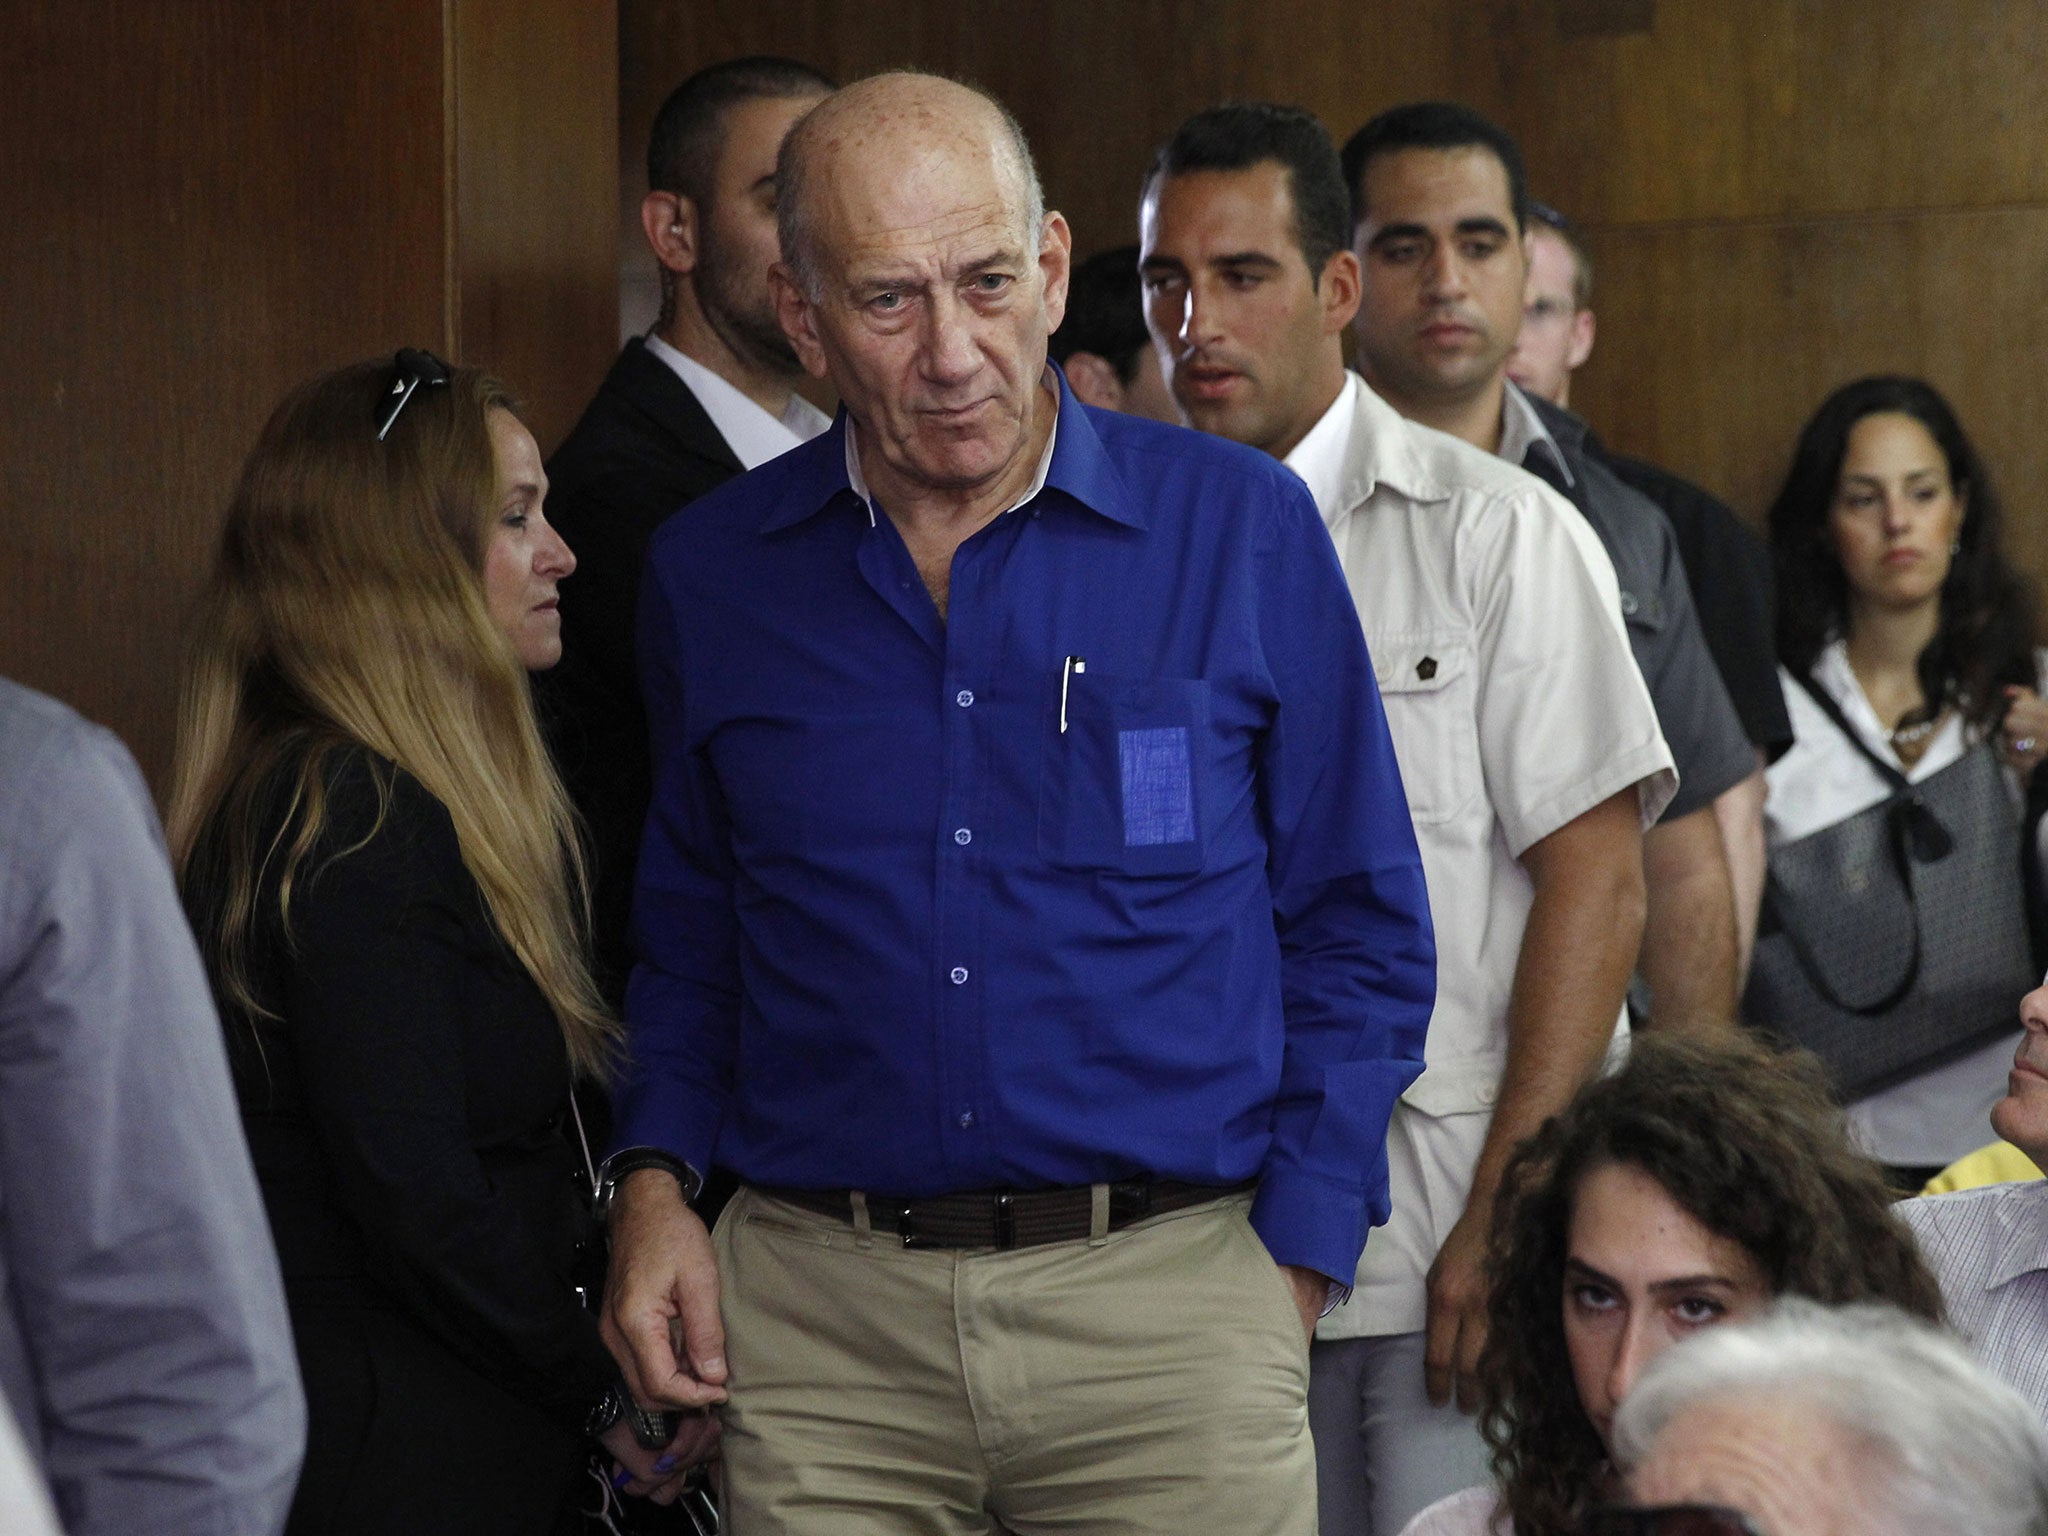 File photo from 13 May, 2014, shows Israel's former Prime Minister Ehud Olmert at the Tel Aviv District Court in Israel